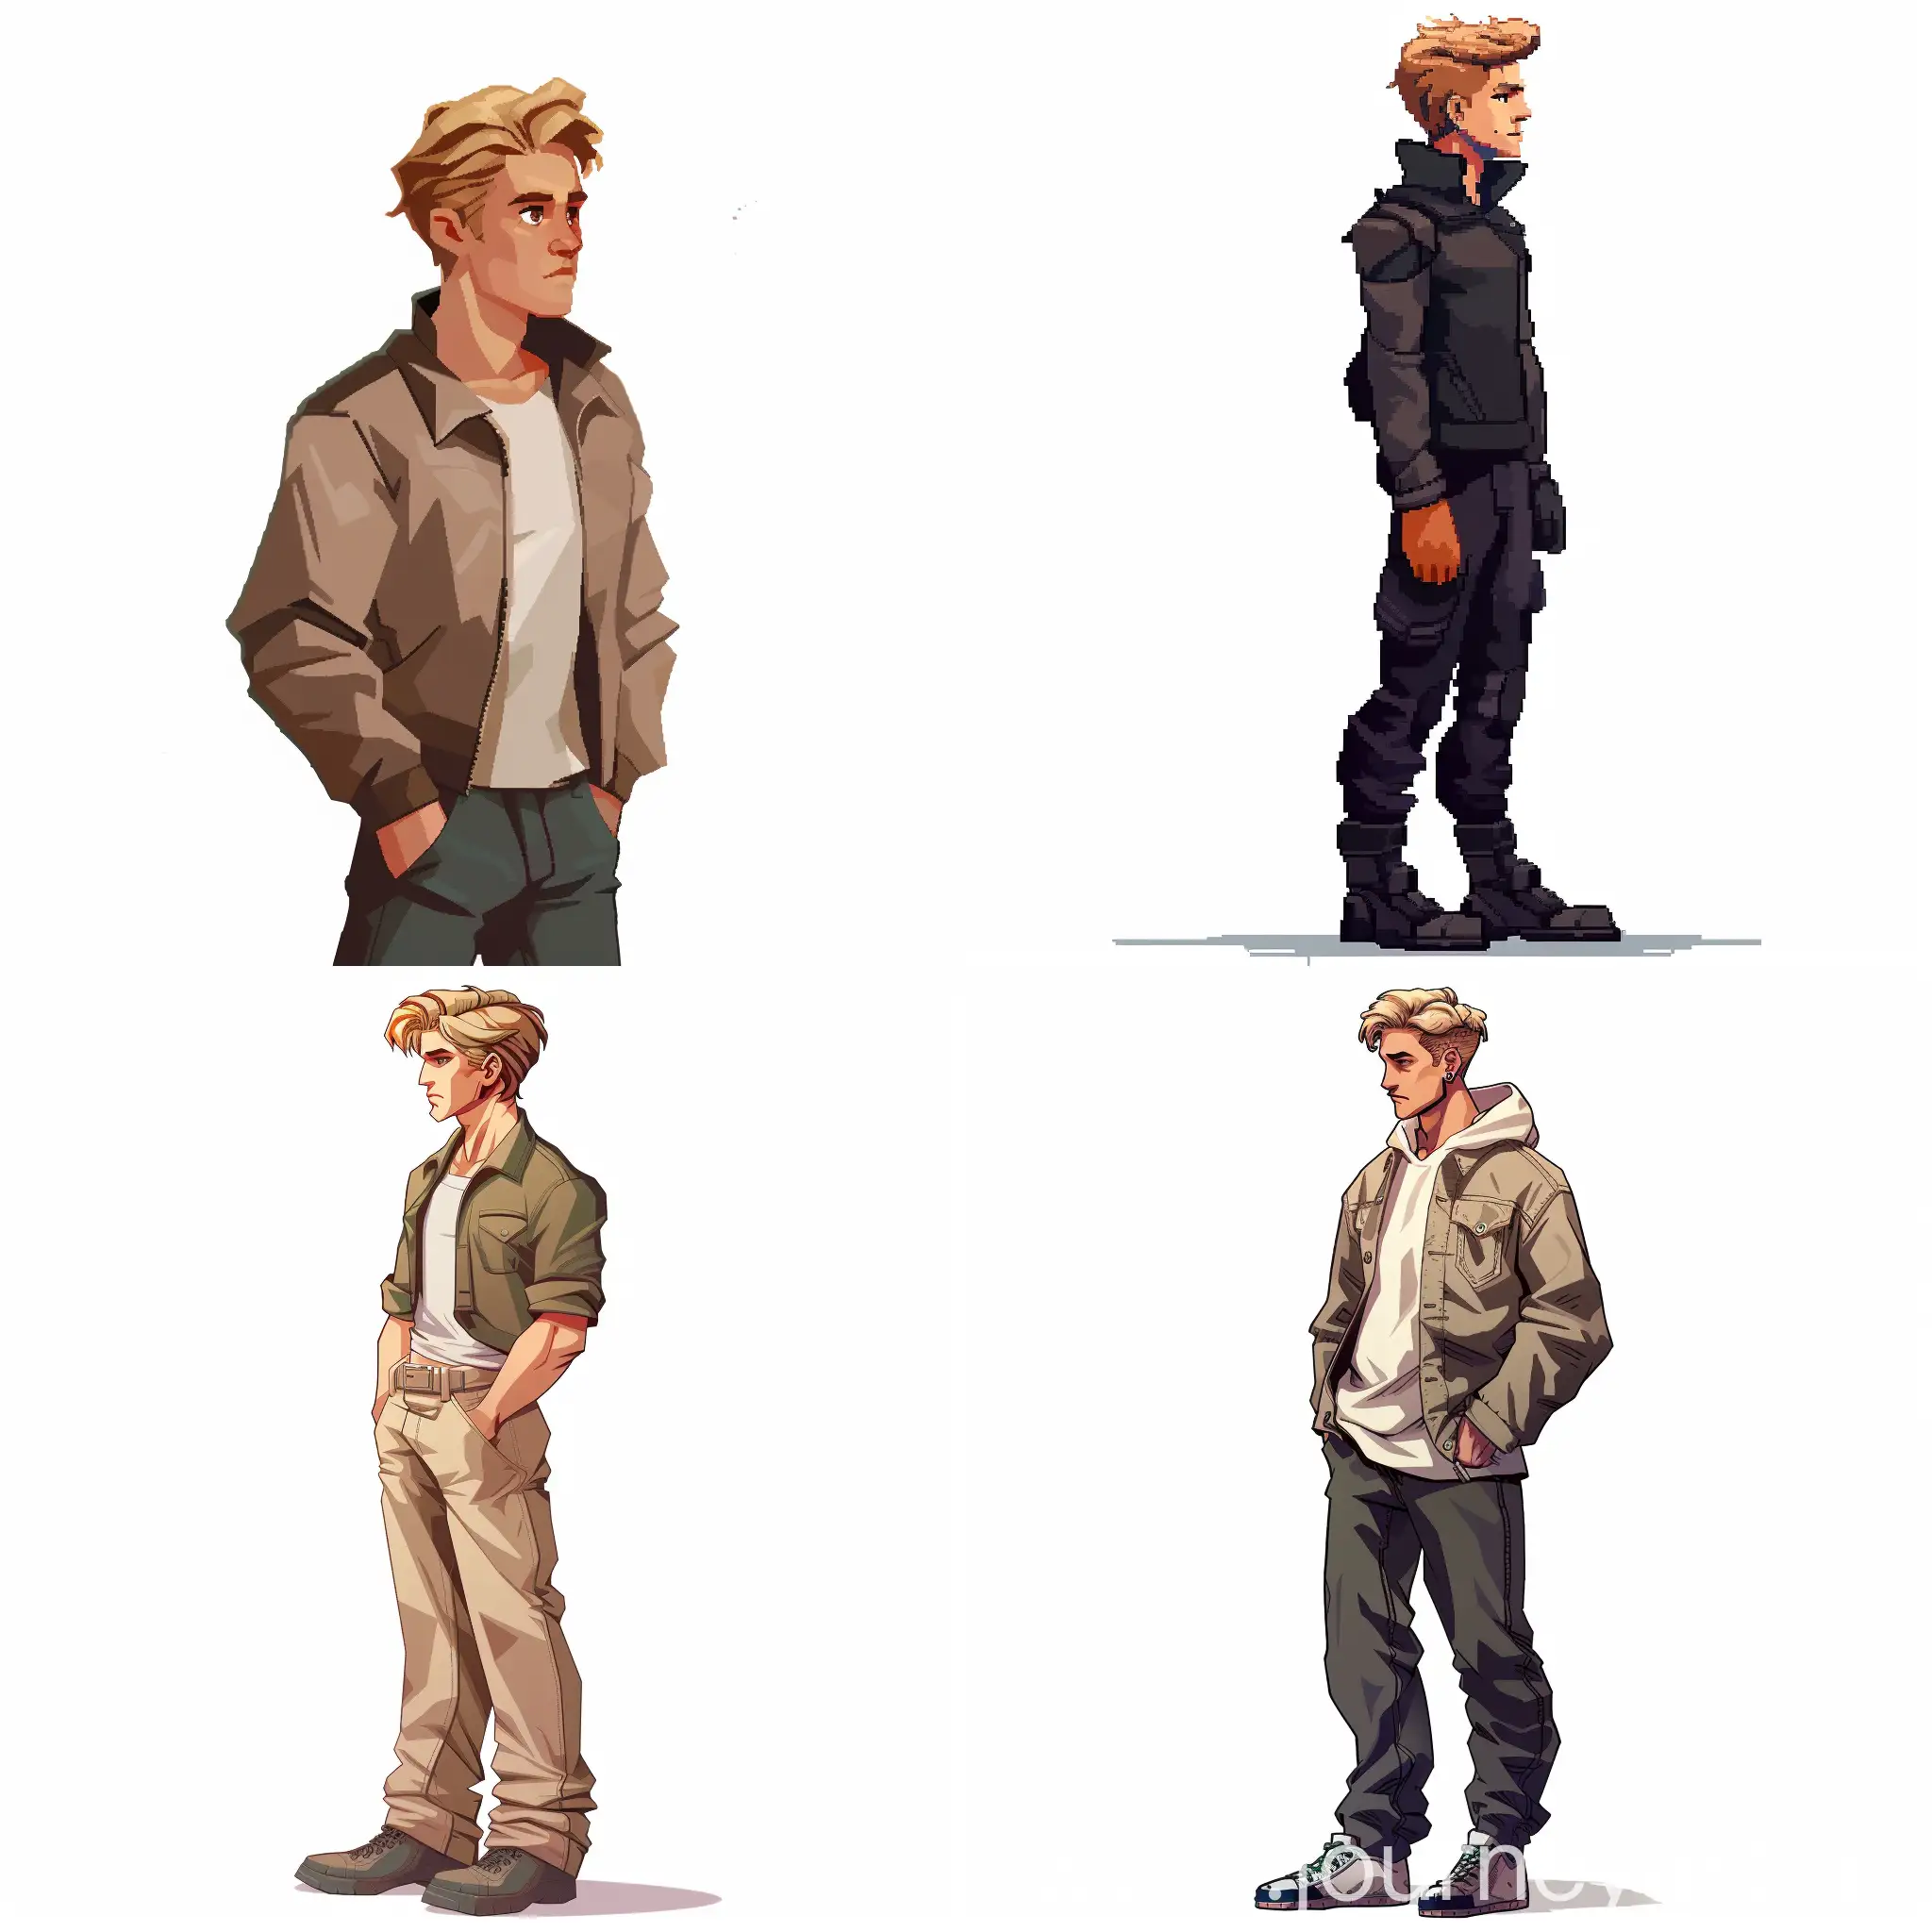 Futuristic-Pixel-Art-Character-FairHaired-Man-in-Tight-Clothes-Side-View